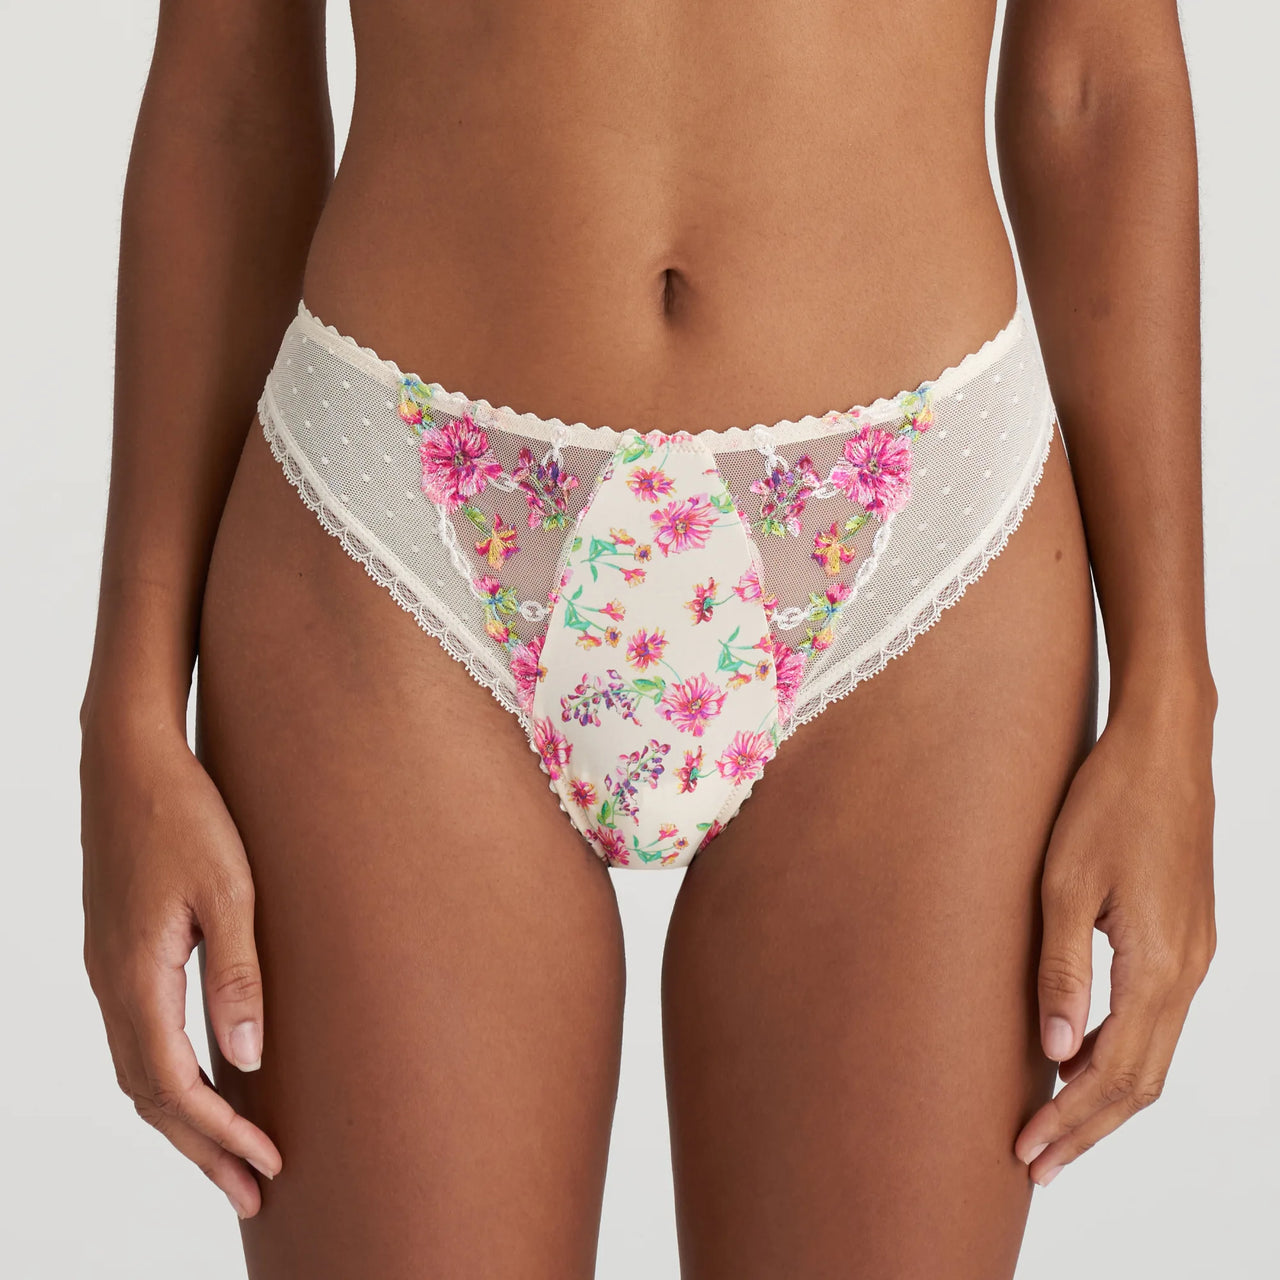 Marie Jo Chen Rio Briefs - Pearled Ivory